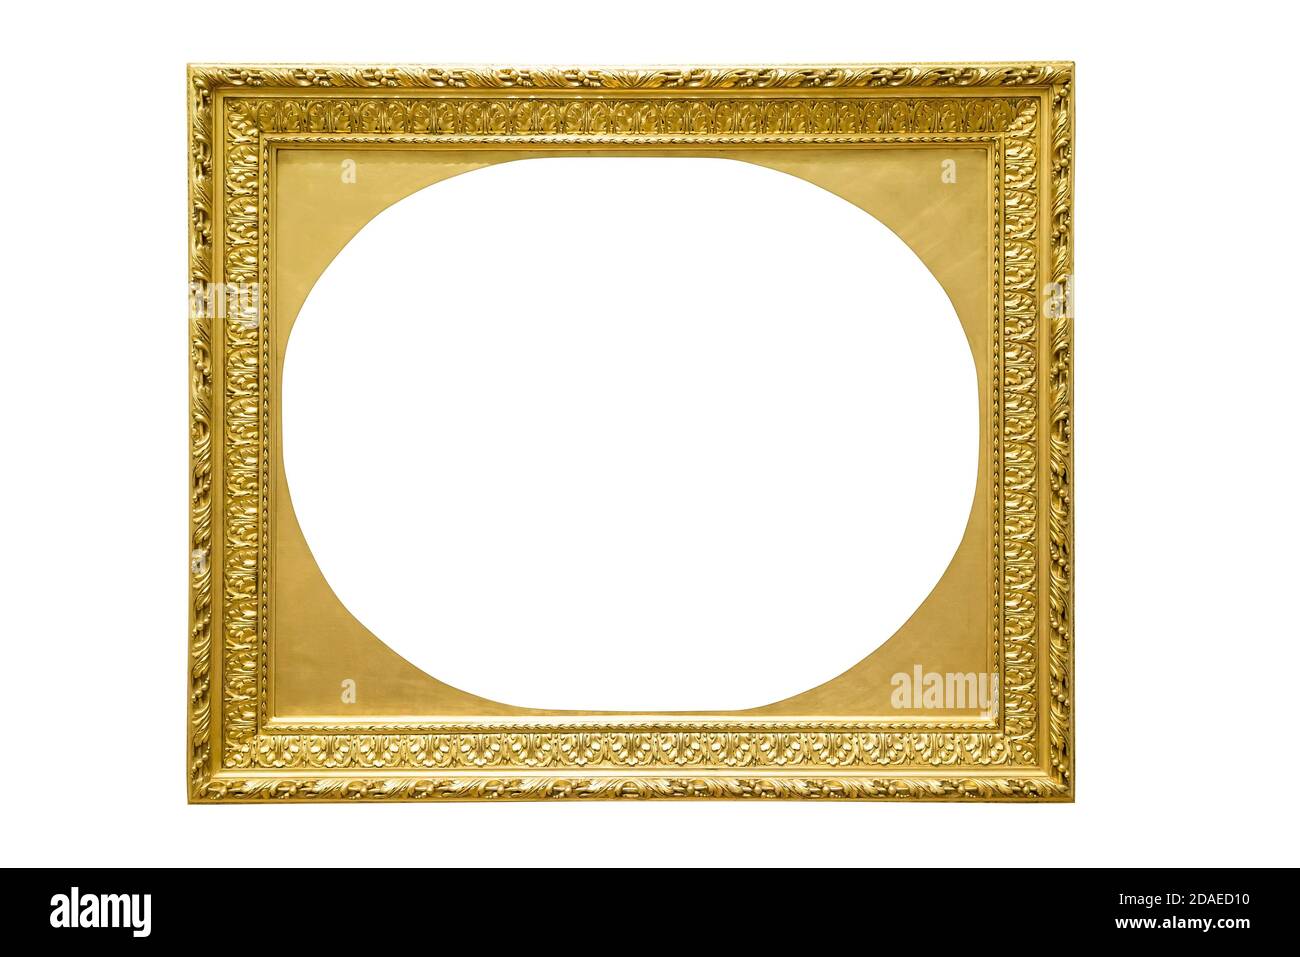 Rectangle decorative golden picture frame with oval interior isolated on white background with clipping path Stock Photo